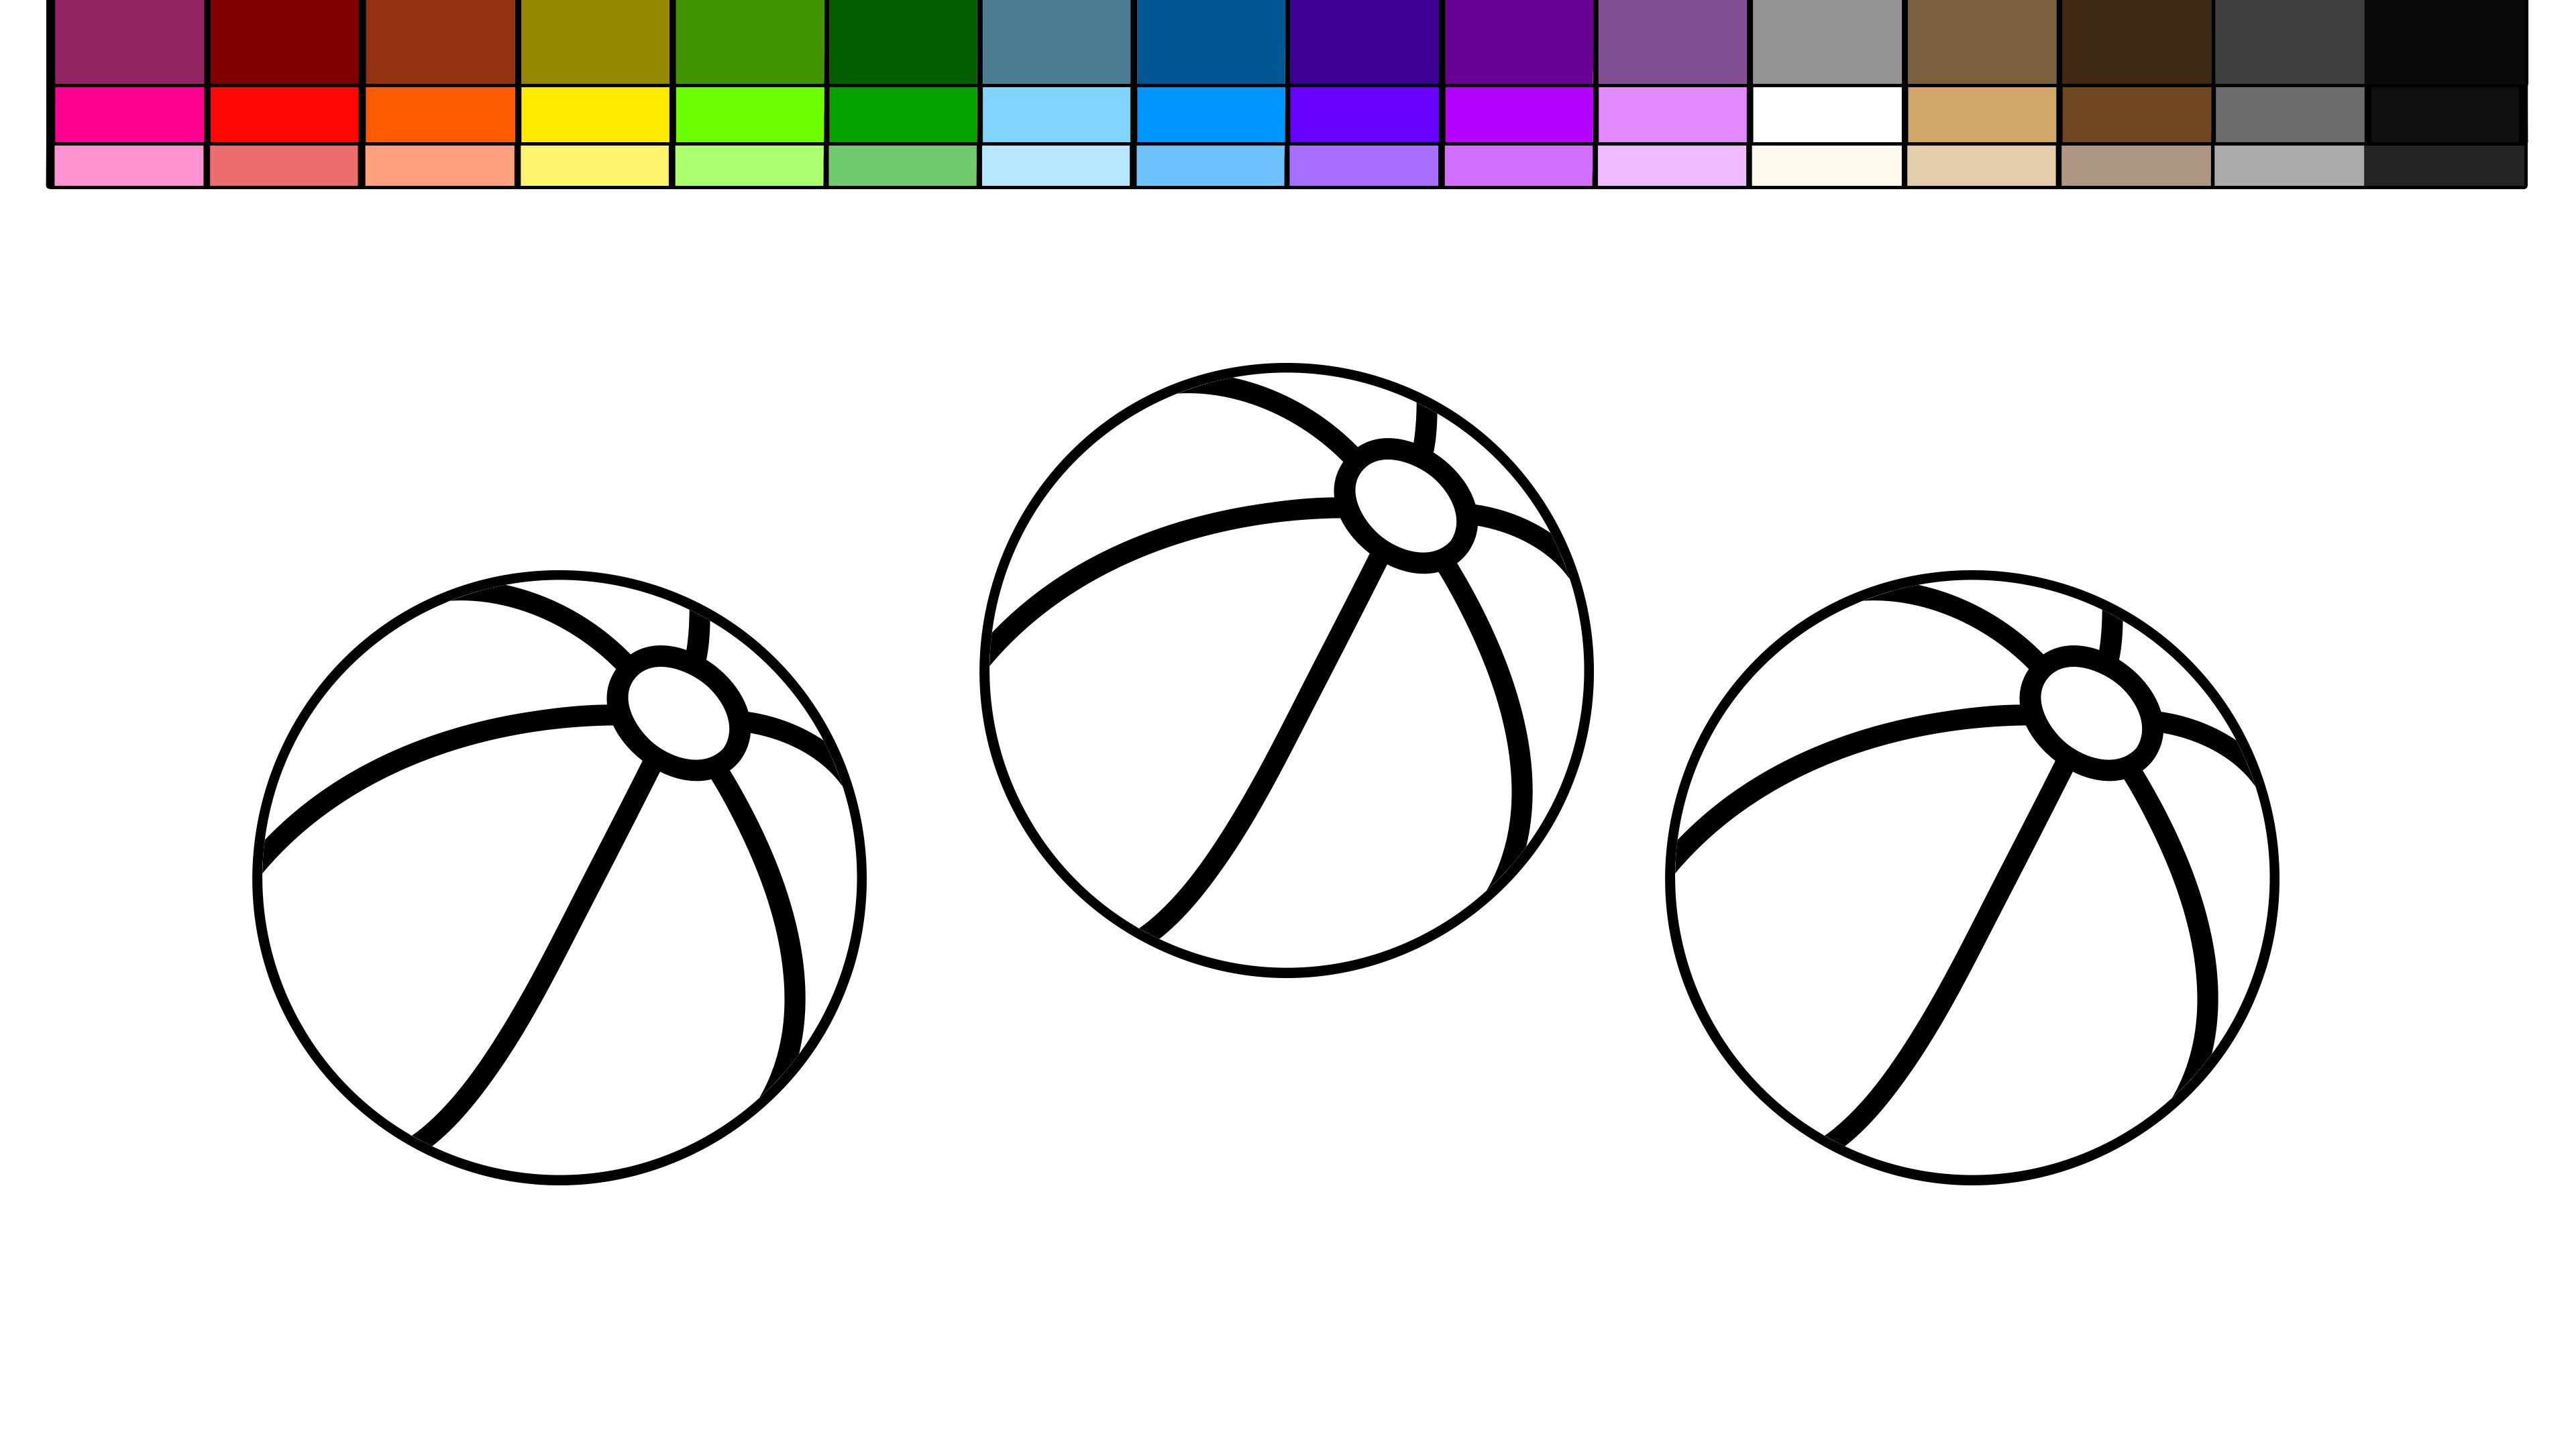 beach-ball-colouring-page-clipart-best